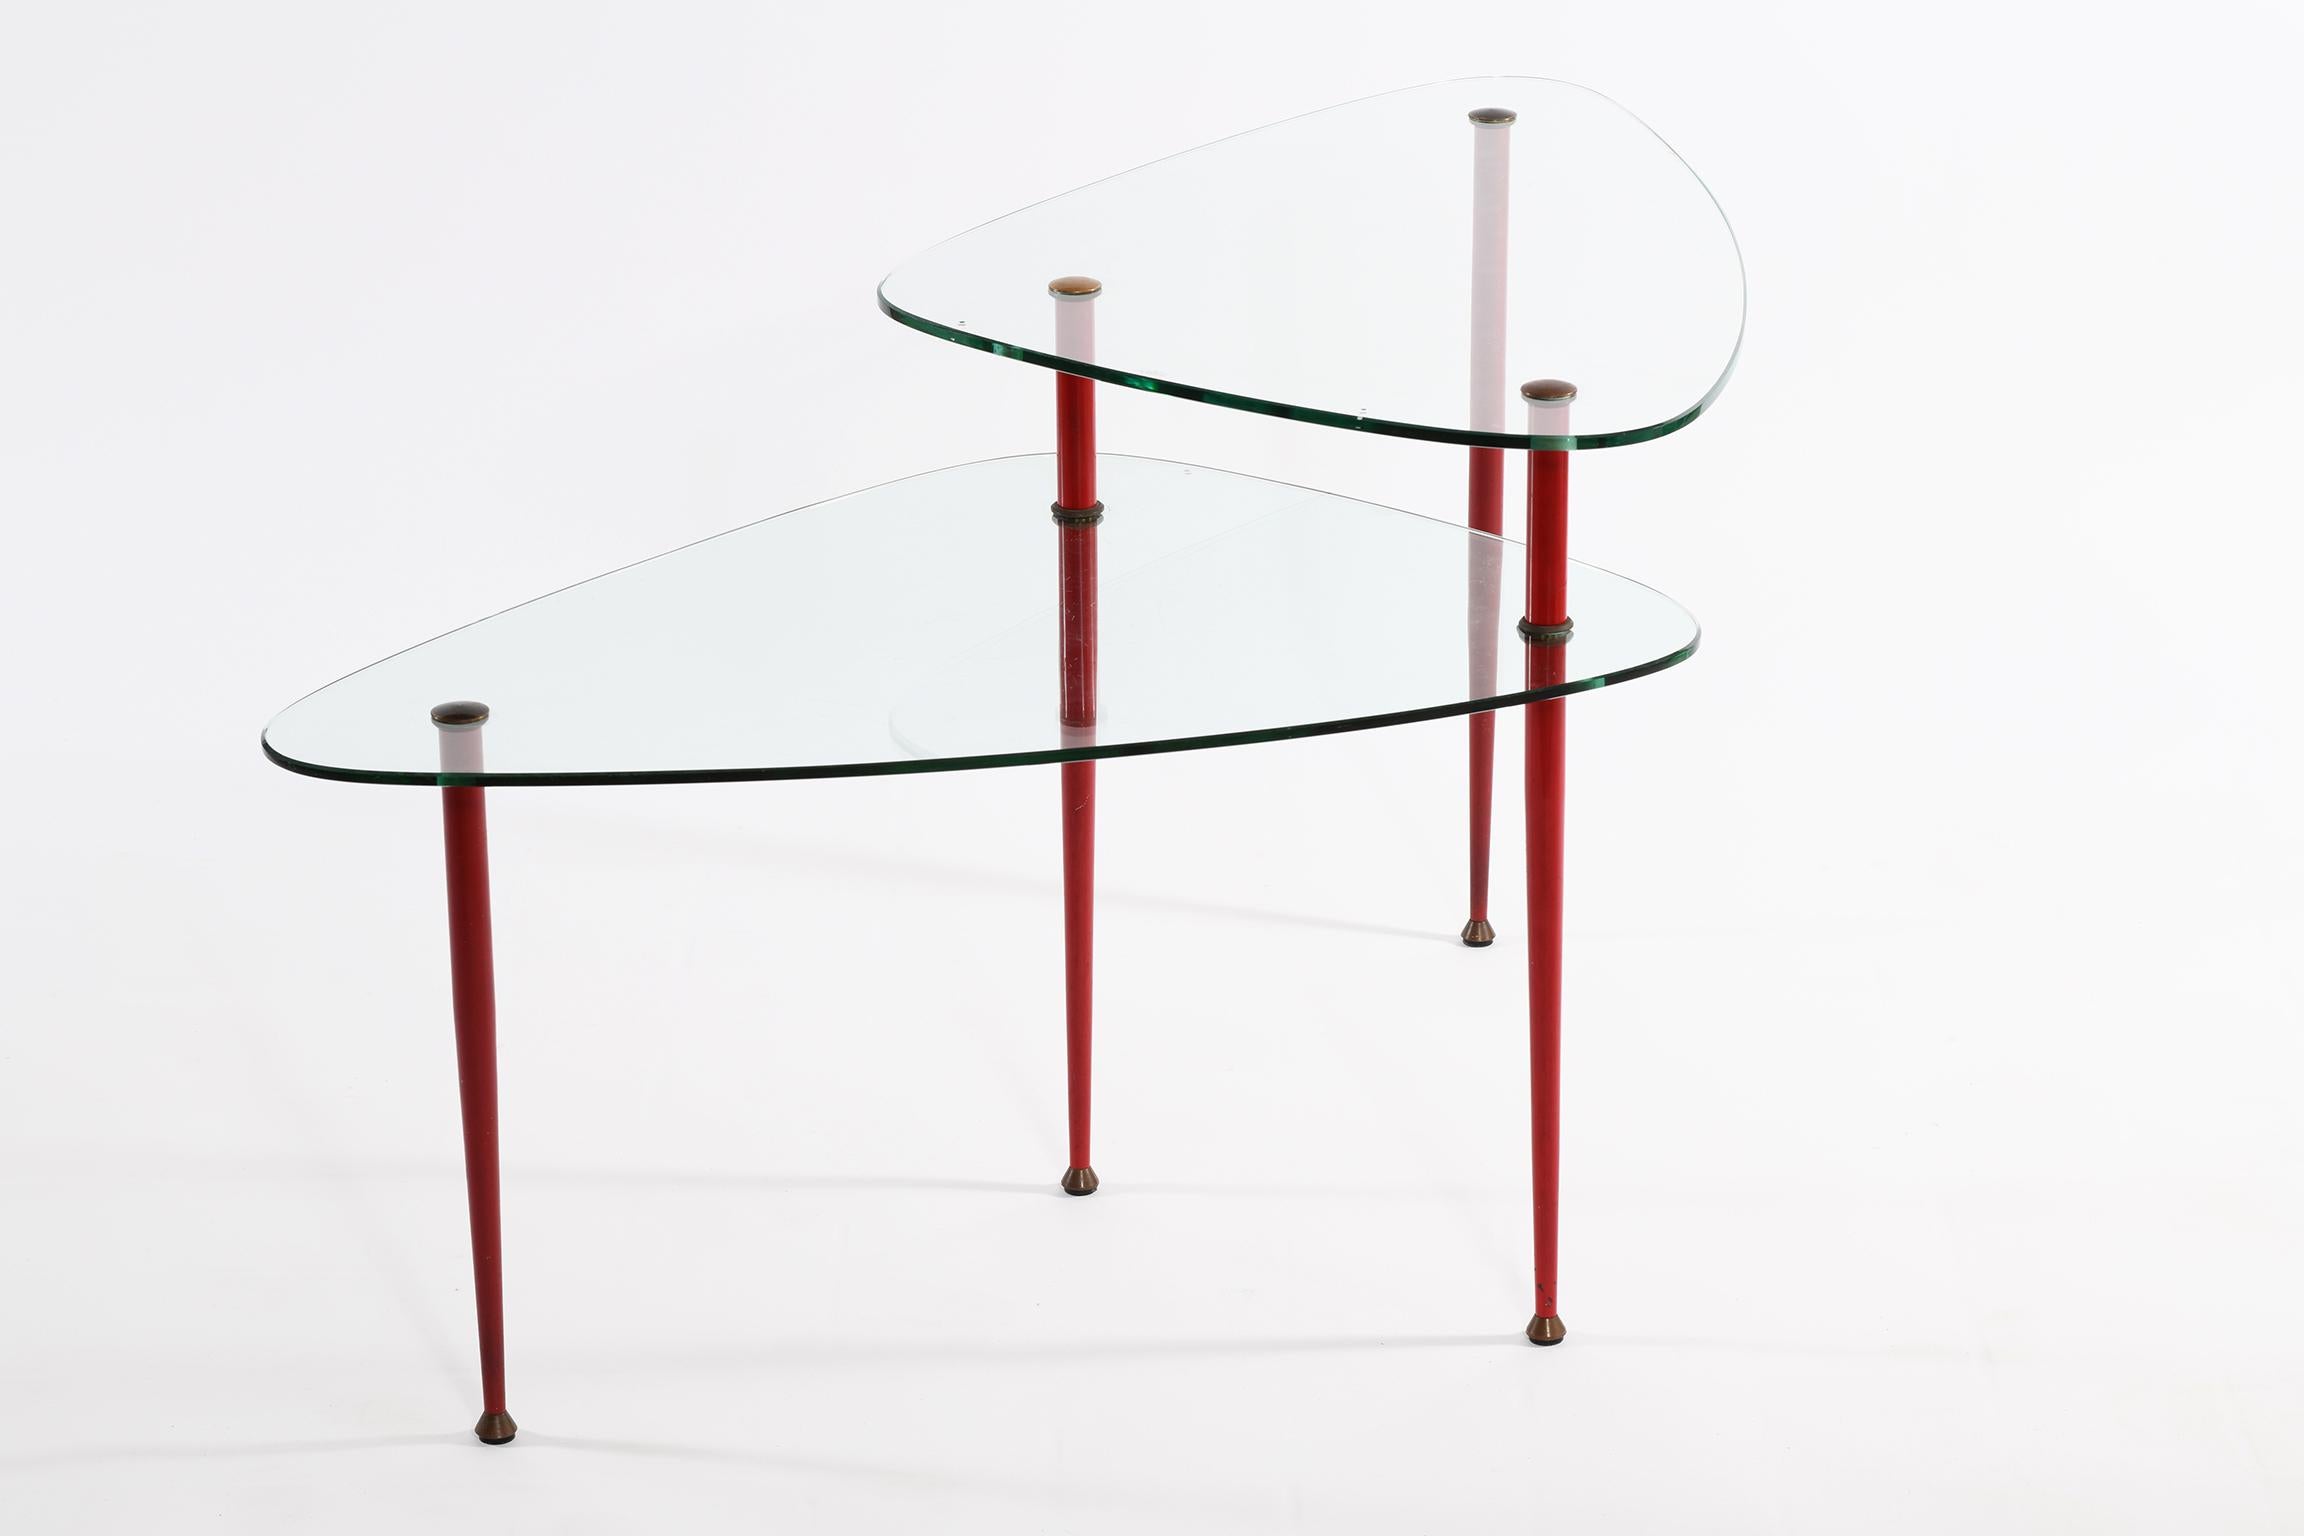 Smoking table with double top in ground and tempered glass (shows the characteristic signs to be tempered) legs in natural and red lacquered brass.
This table can be used in front of the sofas or alongside.
The legs are unscrewed and can be